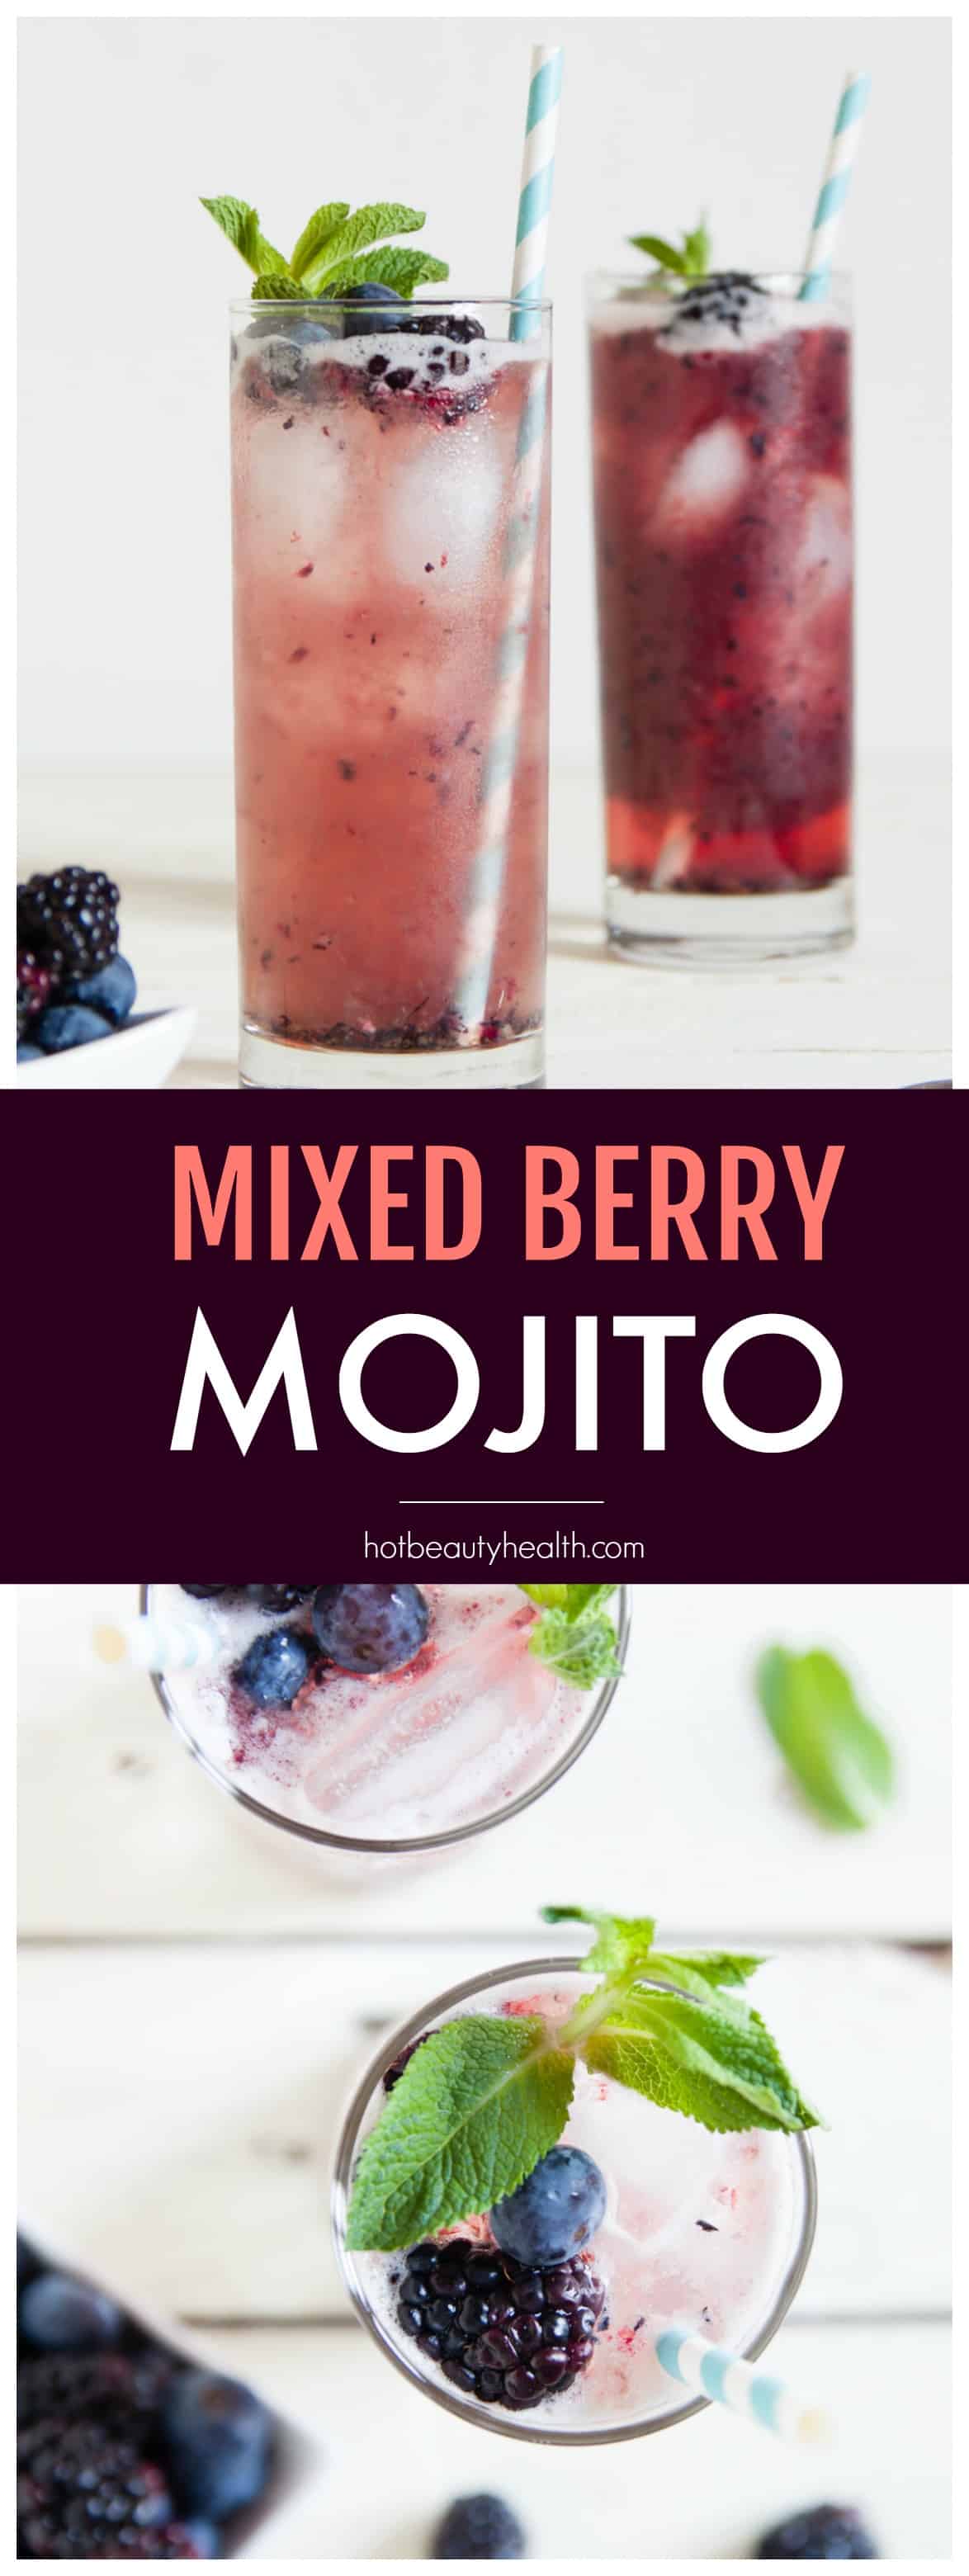 An easy recipe of Mixed Berry Mojitos. It’s a simple yet refreshing mojito cocktail to make for a crowd at parties. Blended with blueberries, blackberries, fresh mint, vodka and lime juice, it’s the perfect drink when hosting parties.